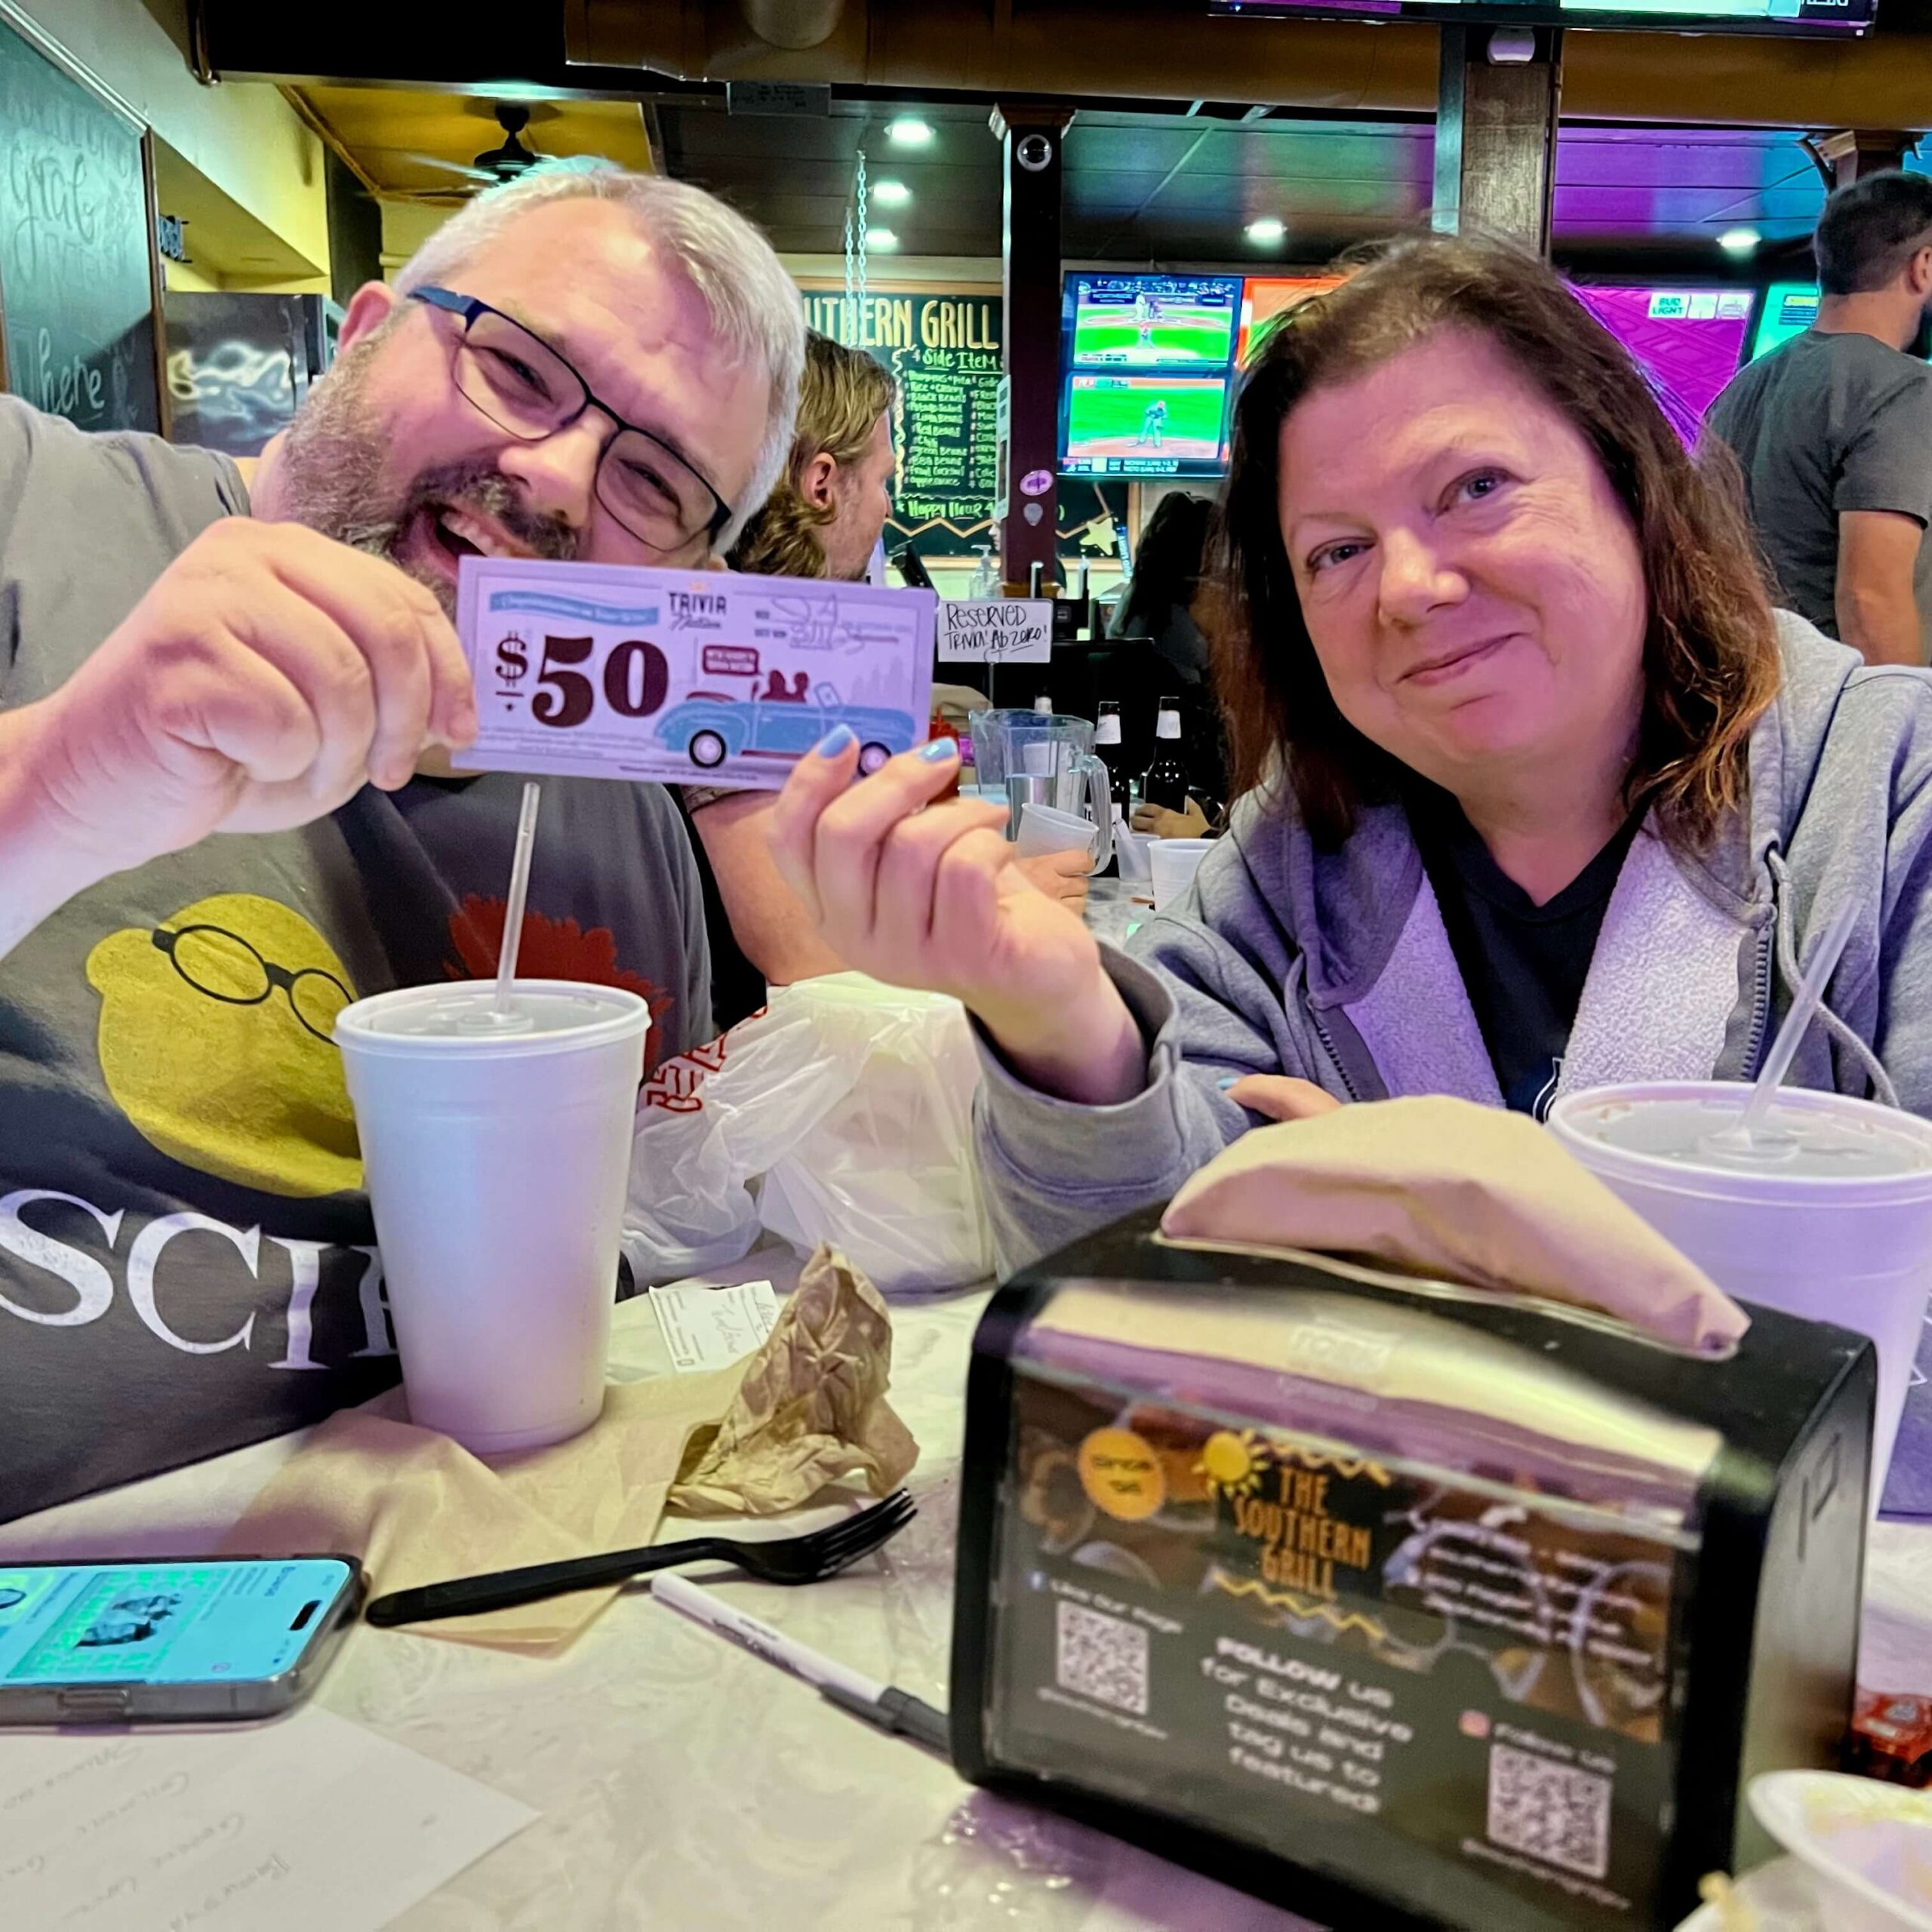 The Southern Grill Jacksonville FL 32207 trivia night 2